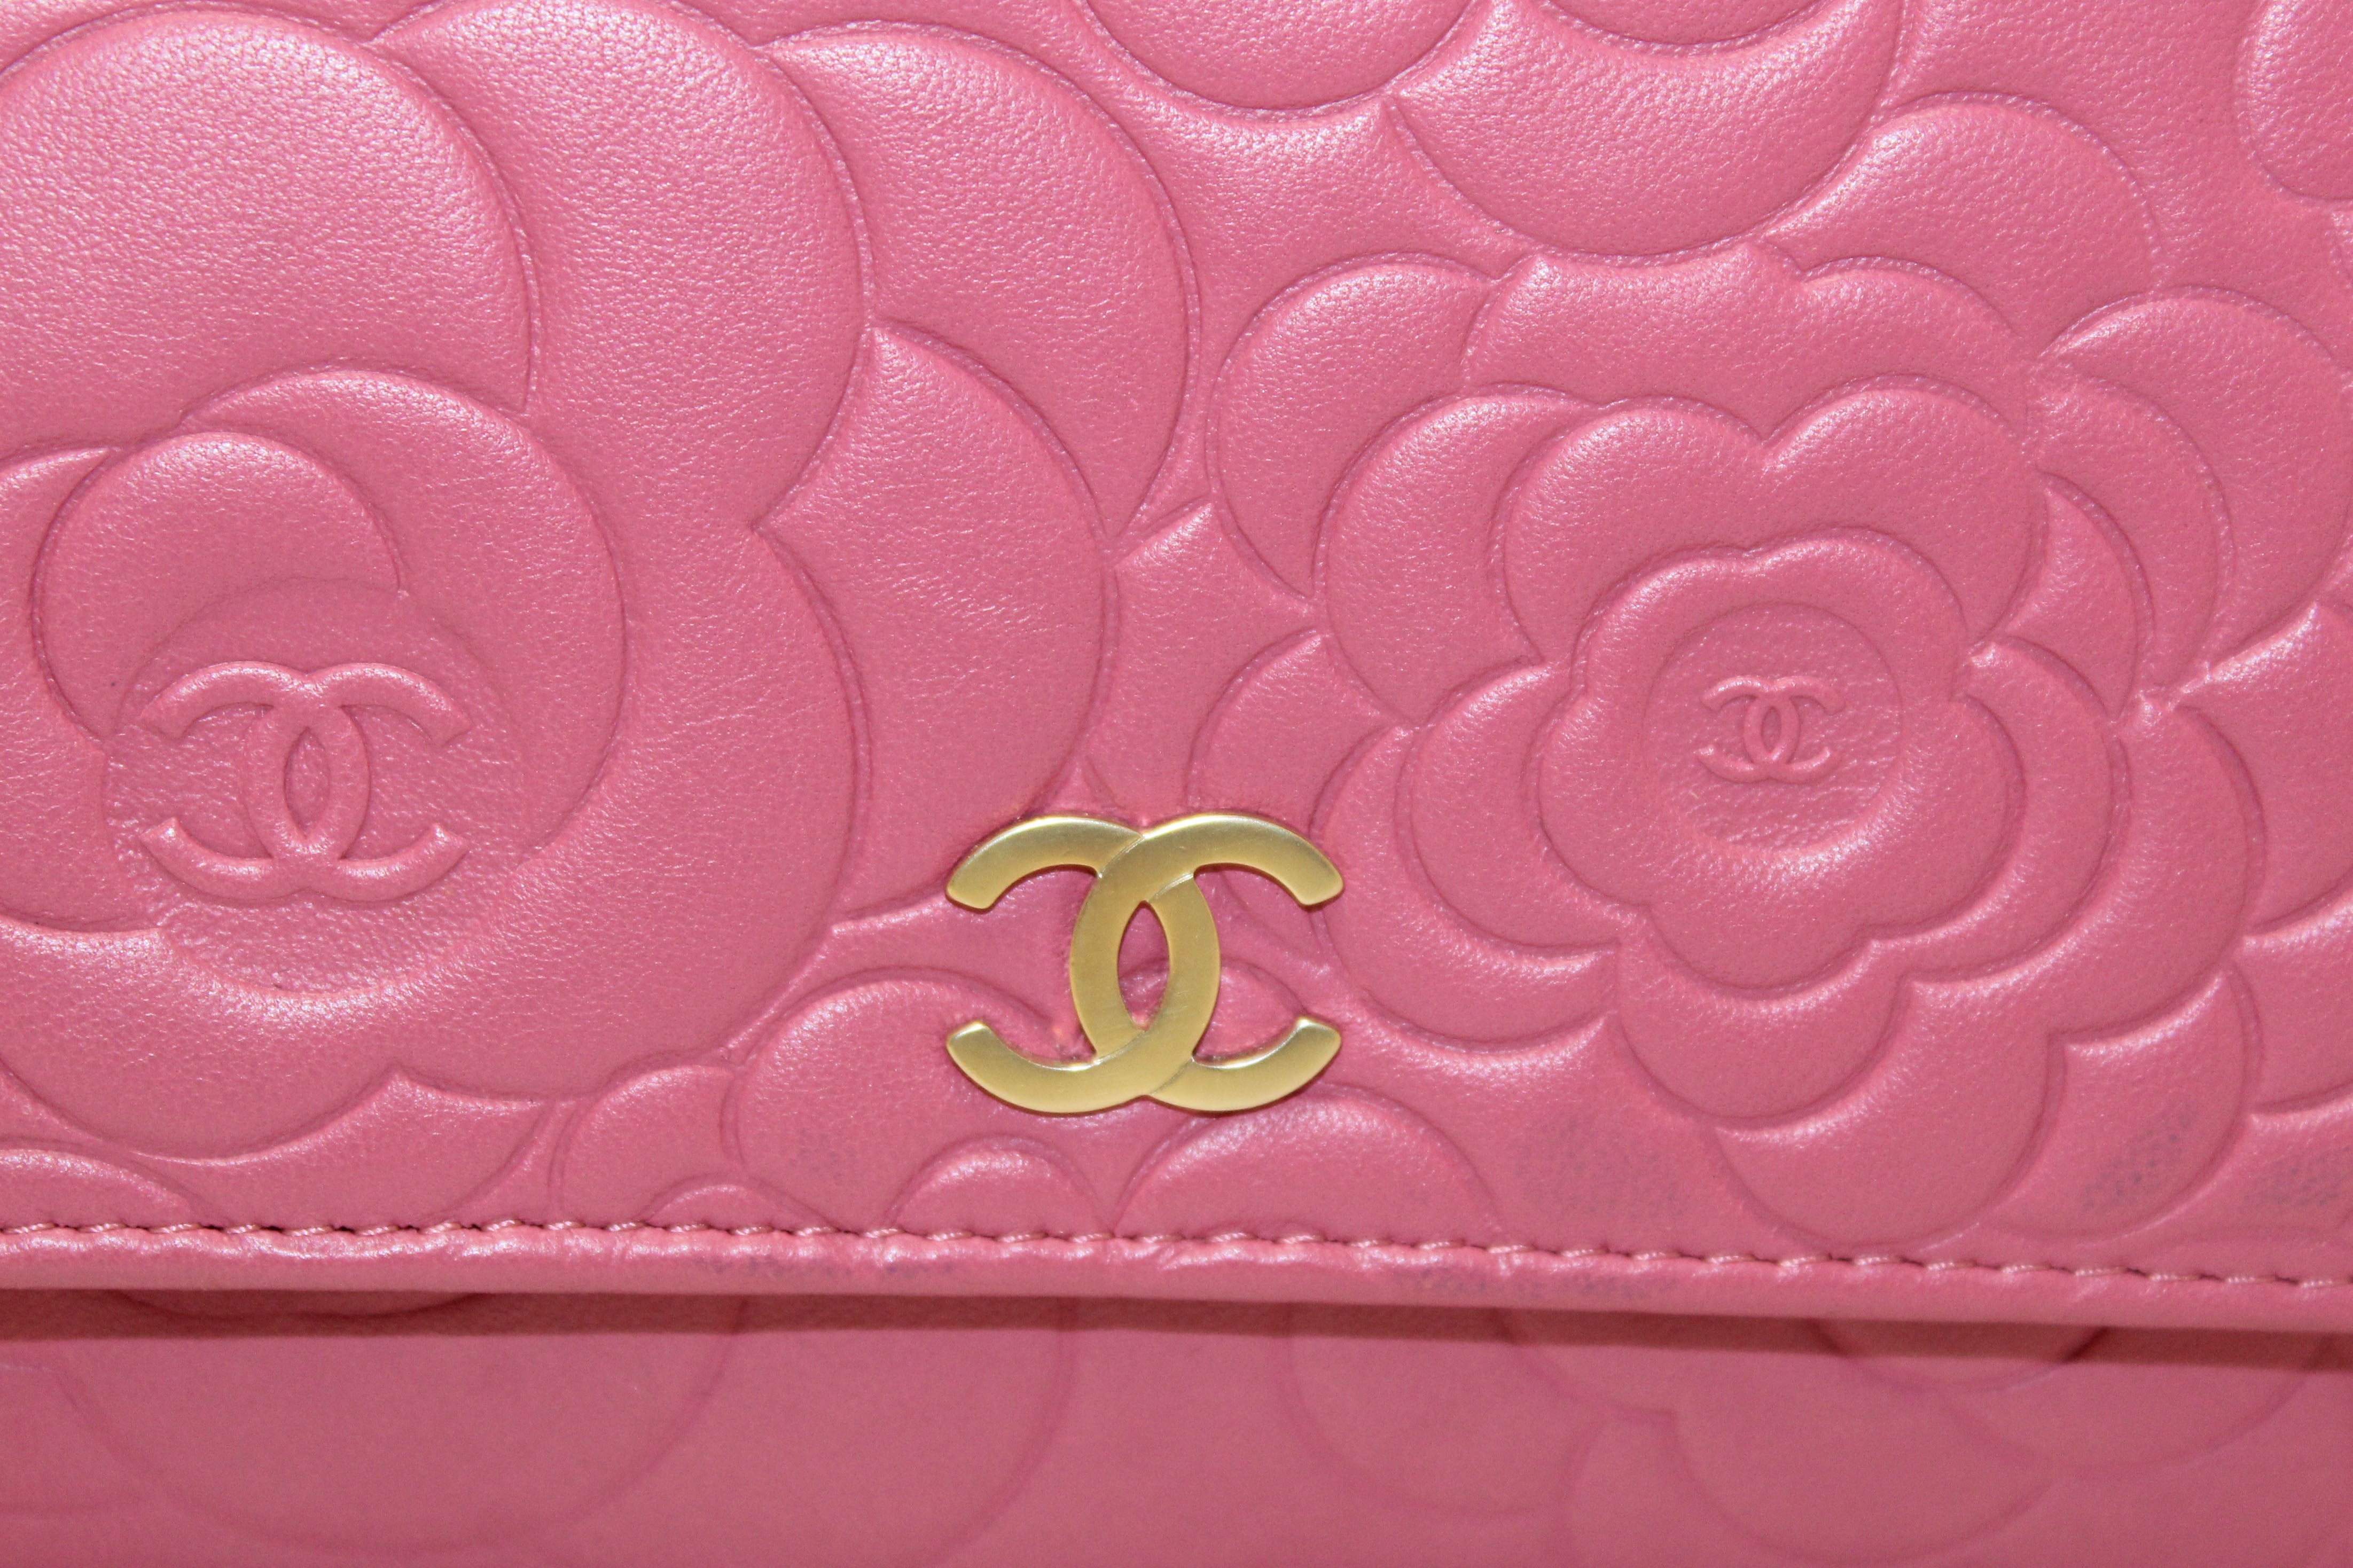 Chanel Pink Quilted Lambskin Leather L Yen Wallet - LabelCentric